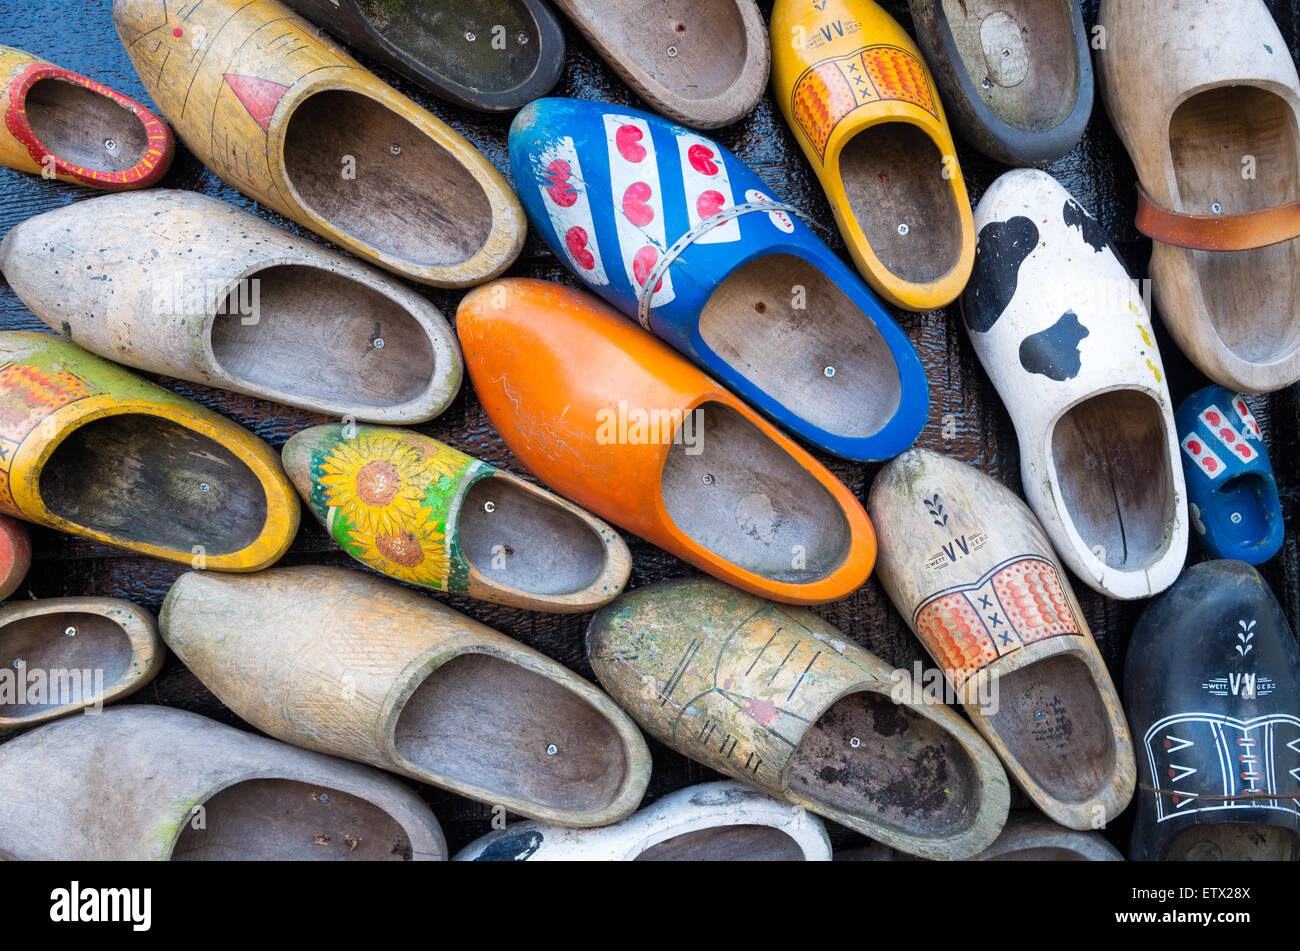 traditional dutch wooden shoes hanging on a wall as decoration Stock Photo